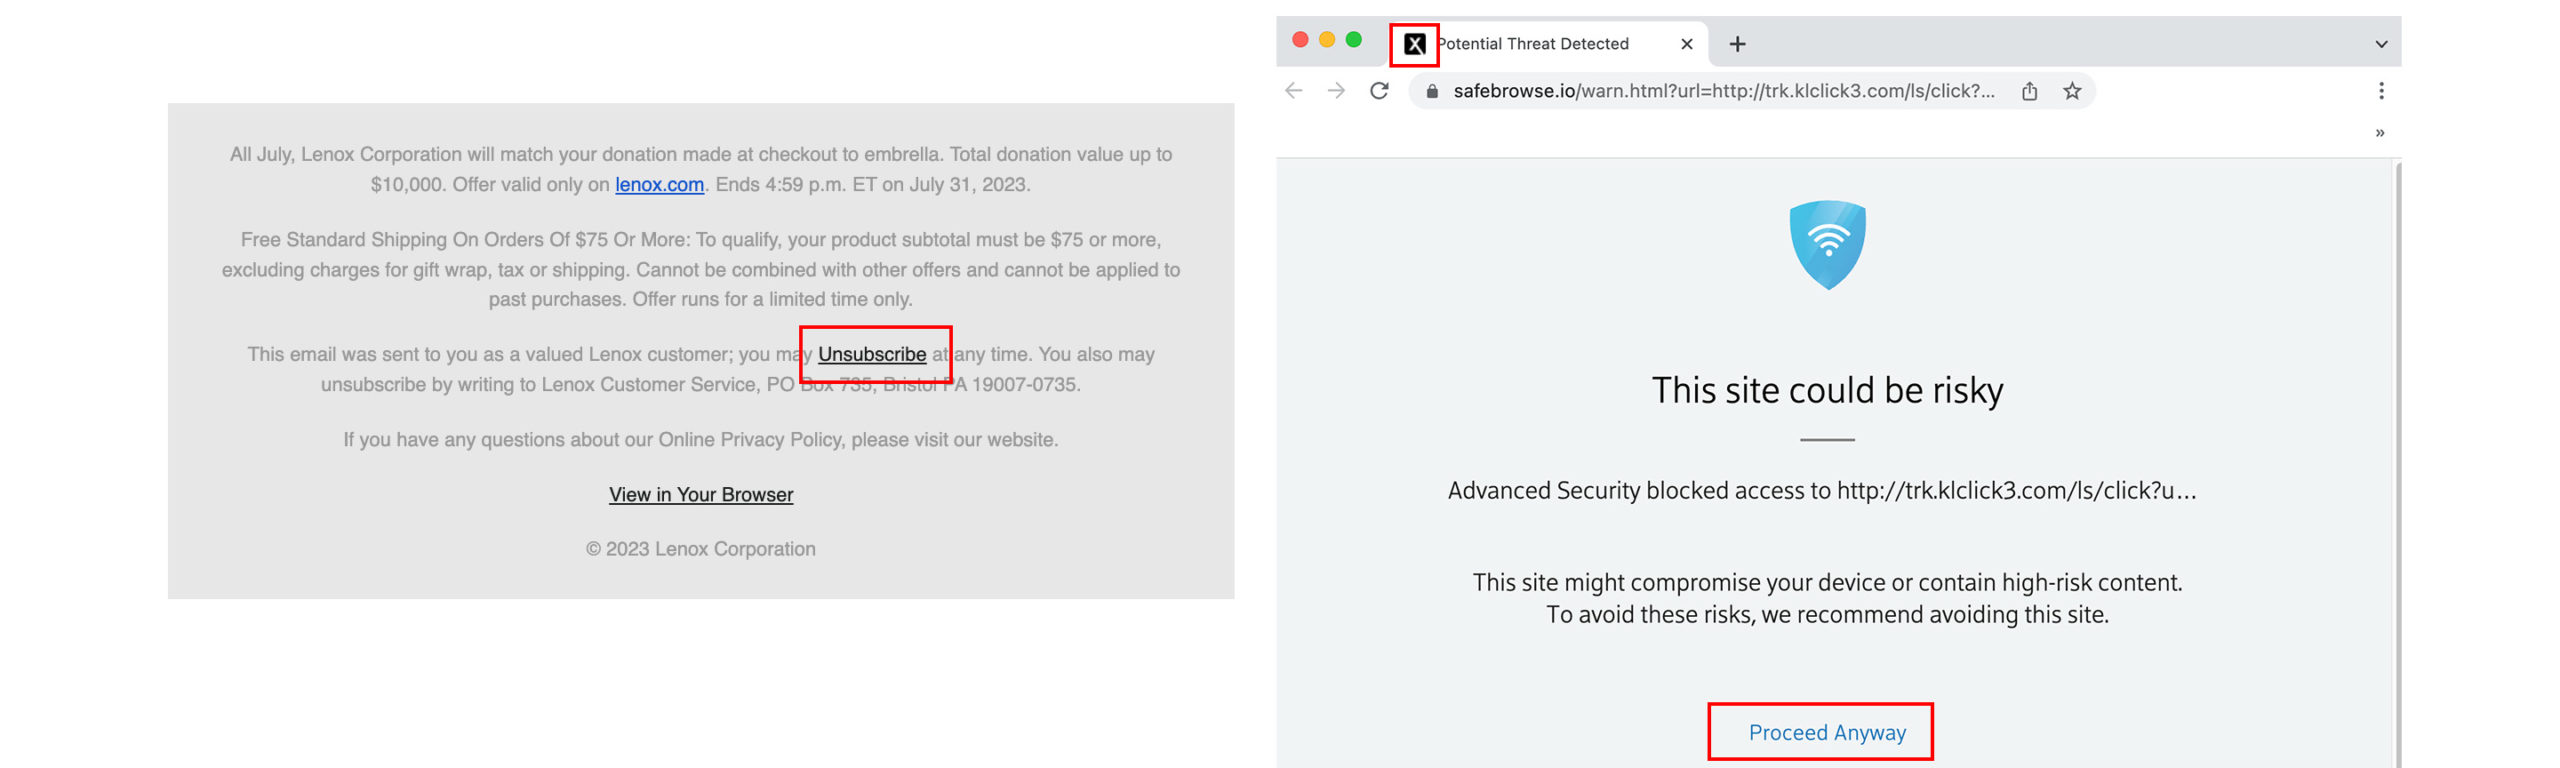 Find an Unsubscribe link in the footer of a marketing email. Unsubscribe is blocked by Safebrowse.io